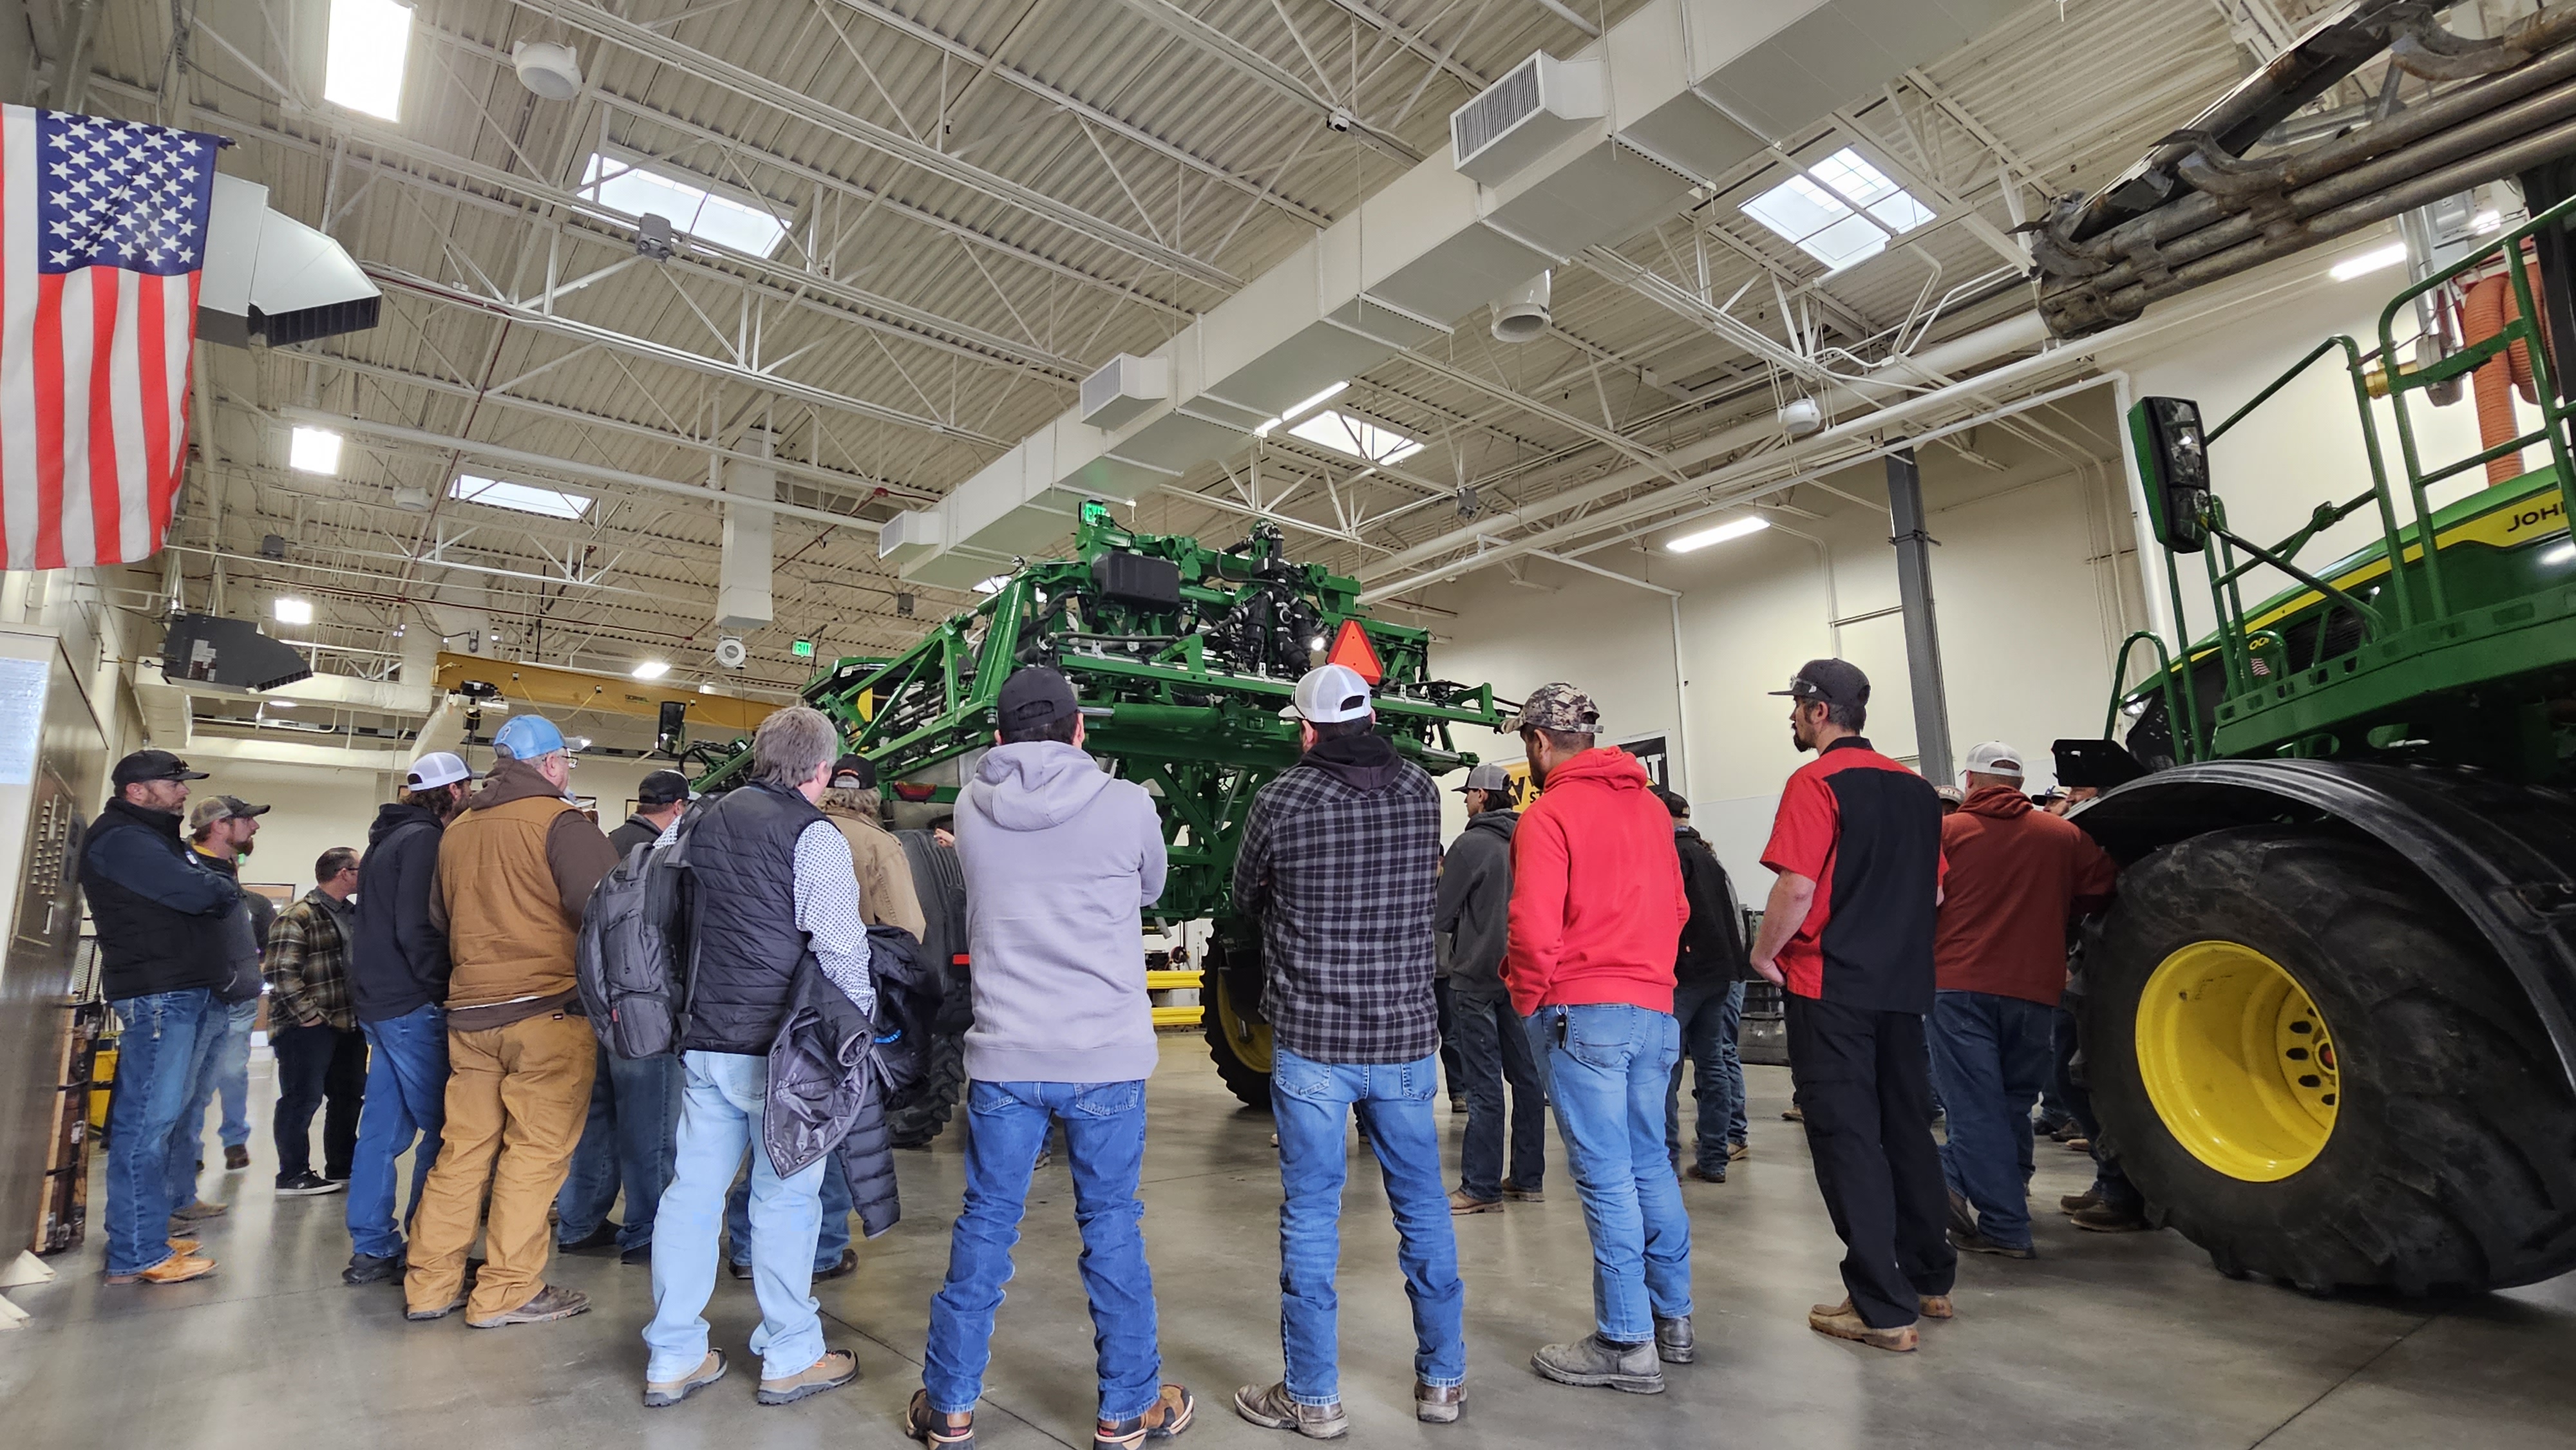 Participants gather around a piece of John Deere farm equipment at an event to certify professionals in the safe use of various agricultural spraying practices for pesticides, herbicides and fertilizers.